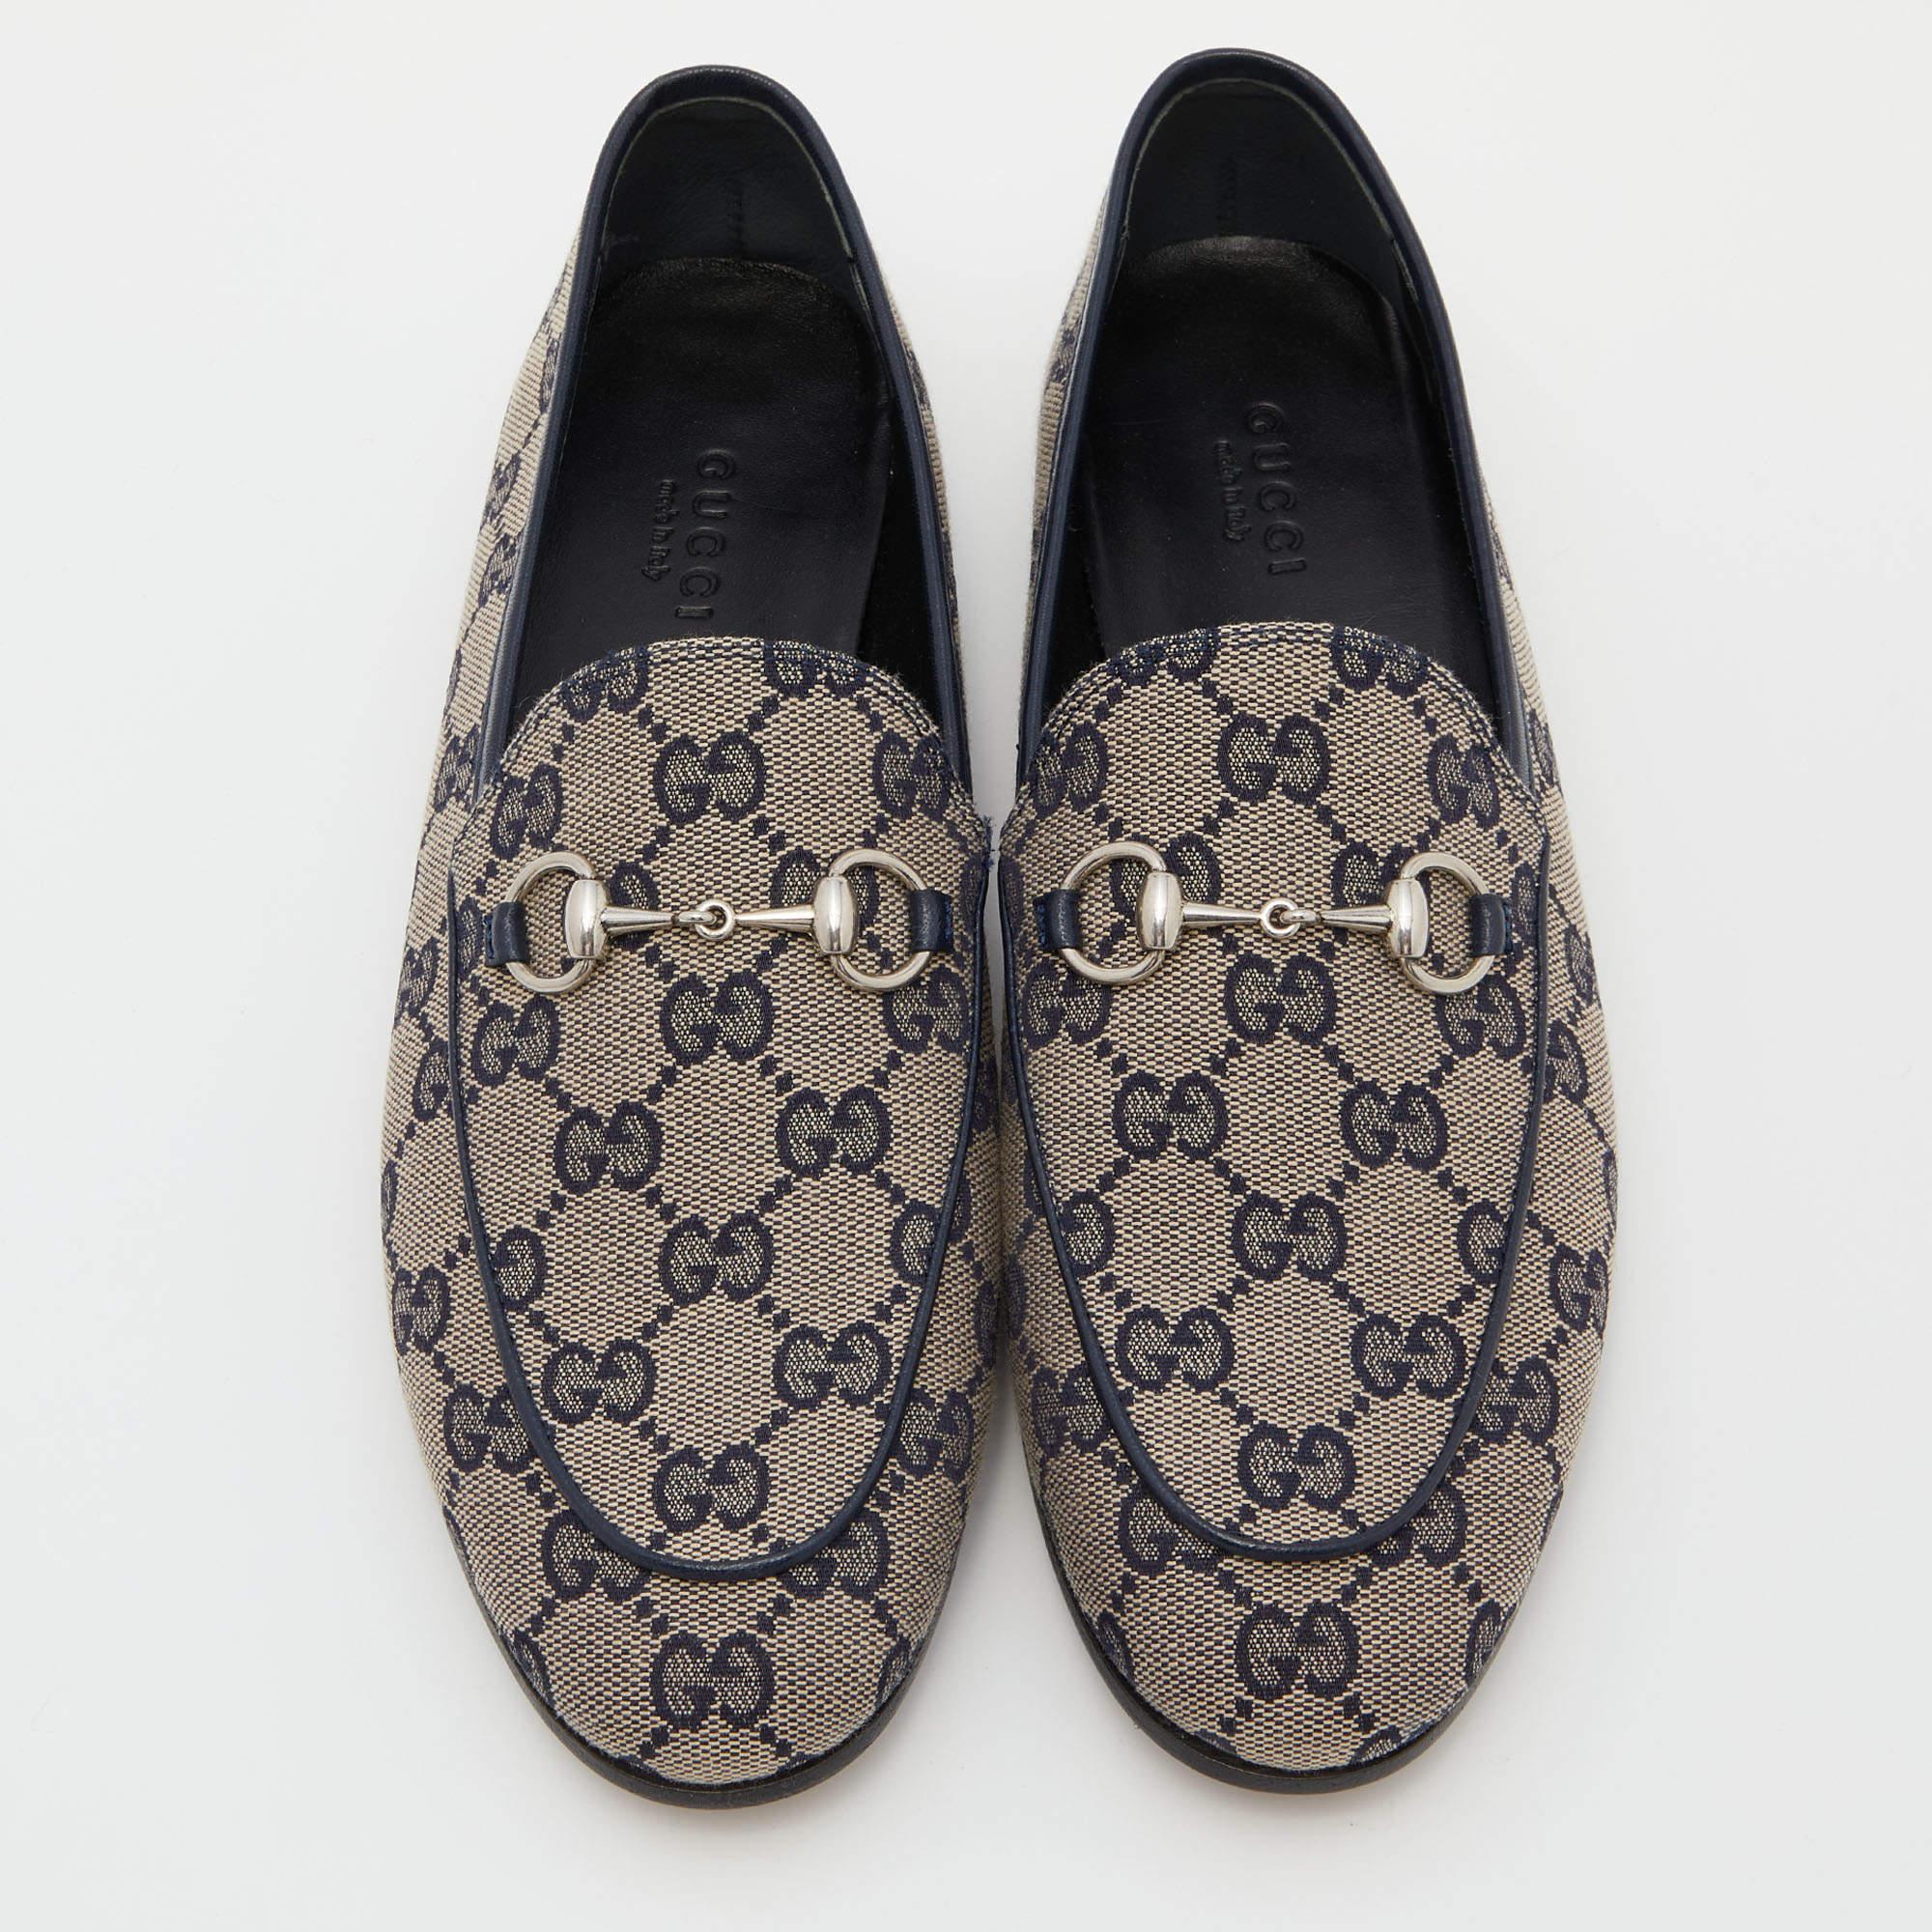 Exquisite and well-crafted, these Gucci loafers are worth owning. They have been crafted from GG canvas, and they come flaunting dual shades and a Horsebit detail on the uppers. The loafers are ideal for wearing all day.

Includes: Original Dustbag
